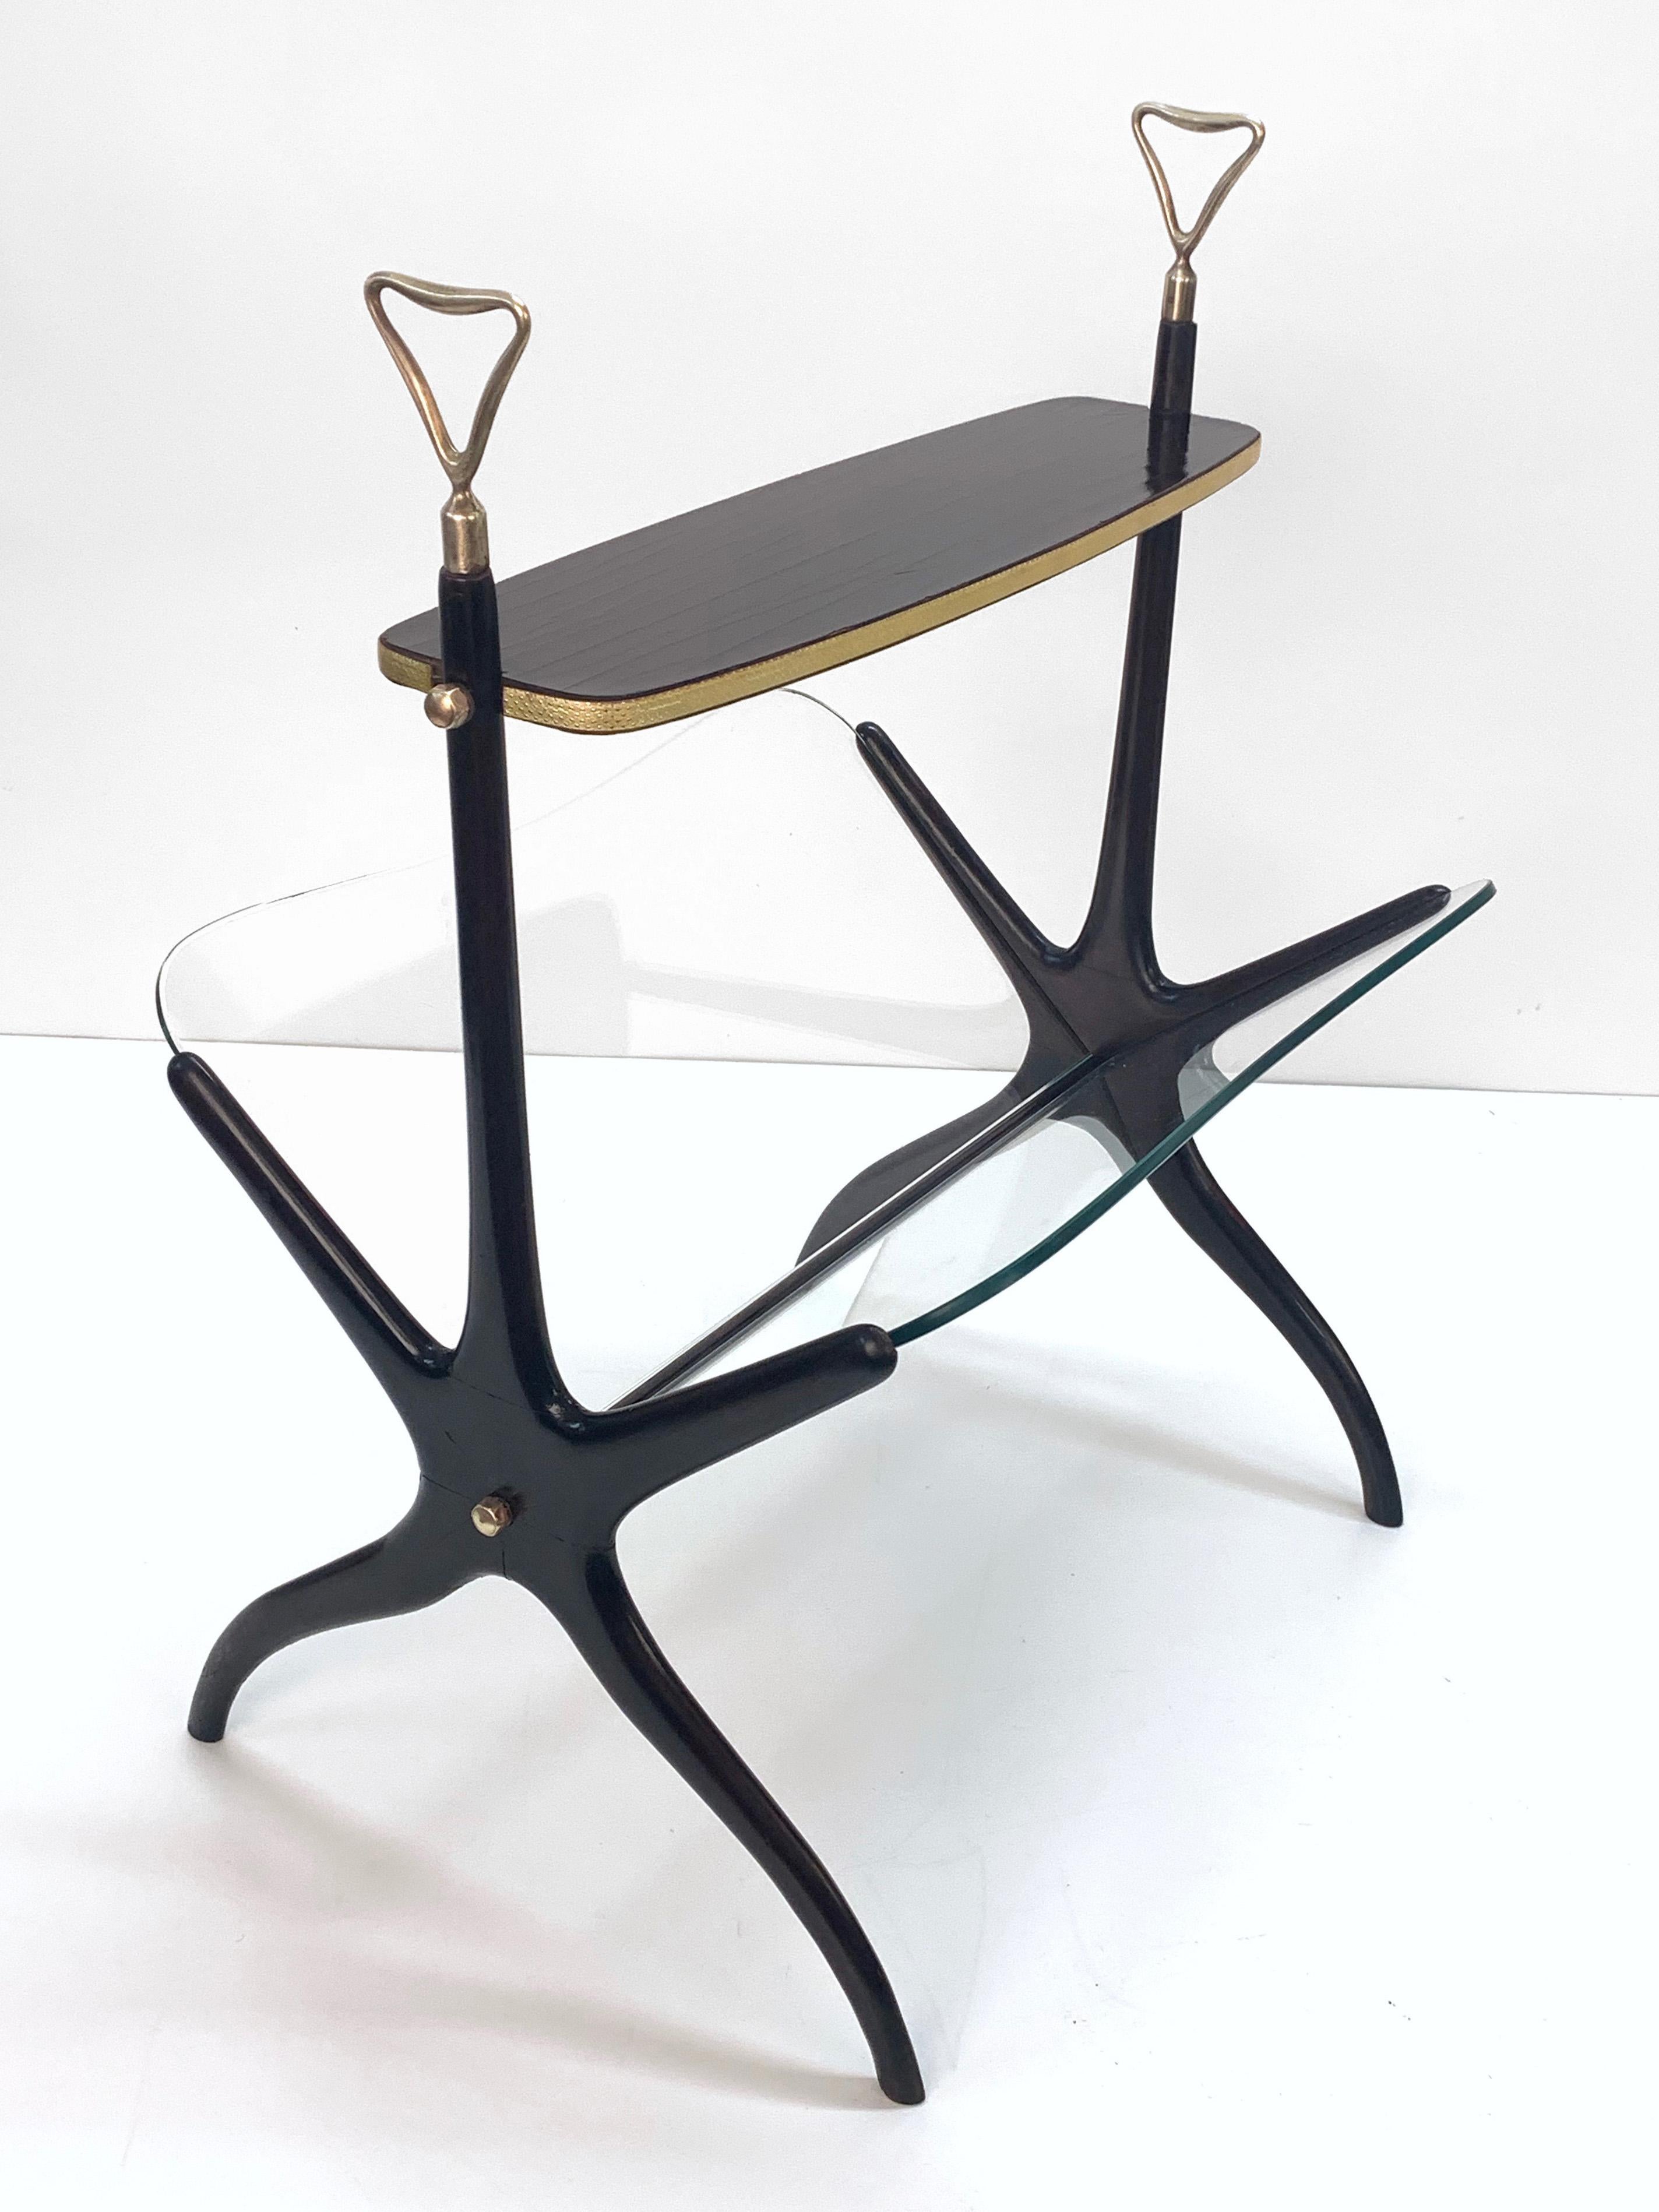 Wonderful midcentury black lacquered mahogany magazine rack. This great item was designed in Italy during the 1950s by Cesare Lacca.

It has a top mahogany base and a bottom double glass trays.

This fantastic piece is in wonderful vintage